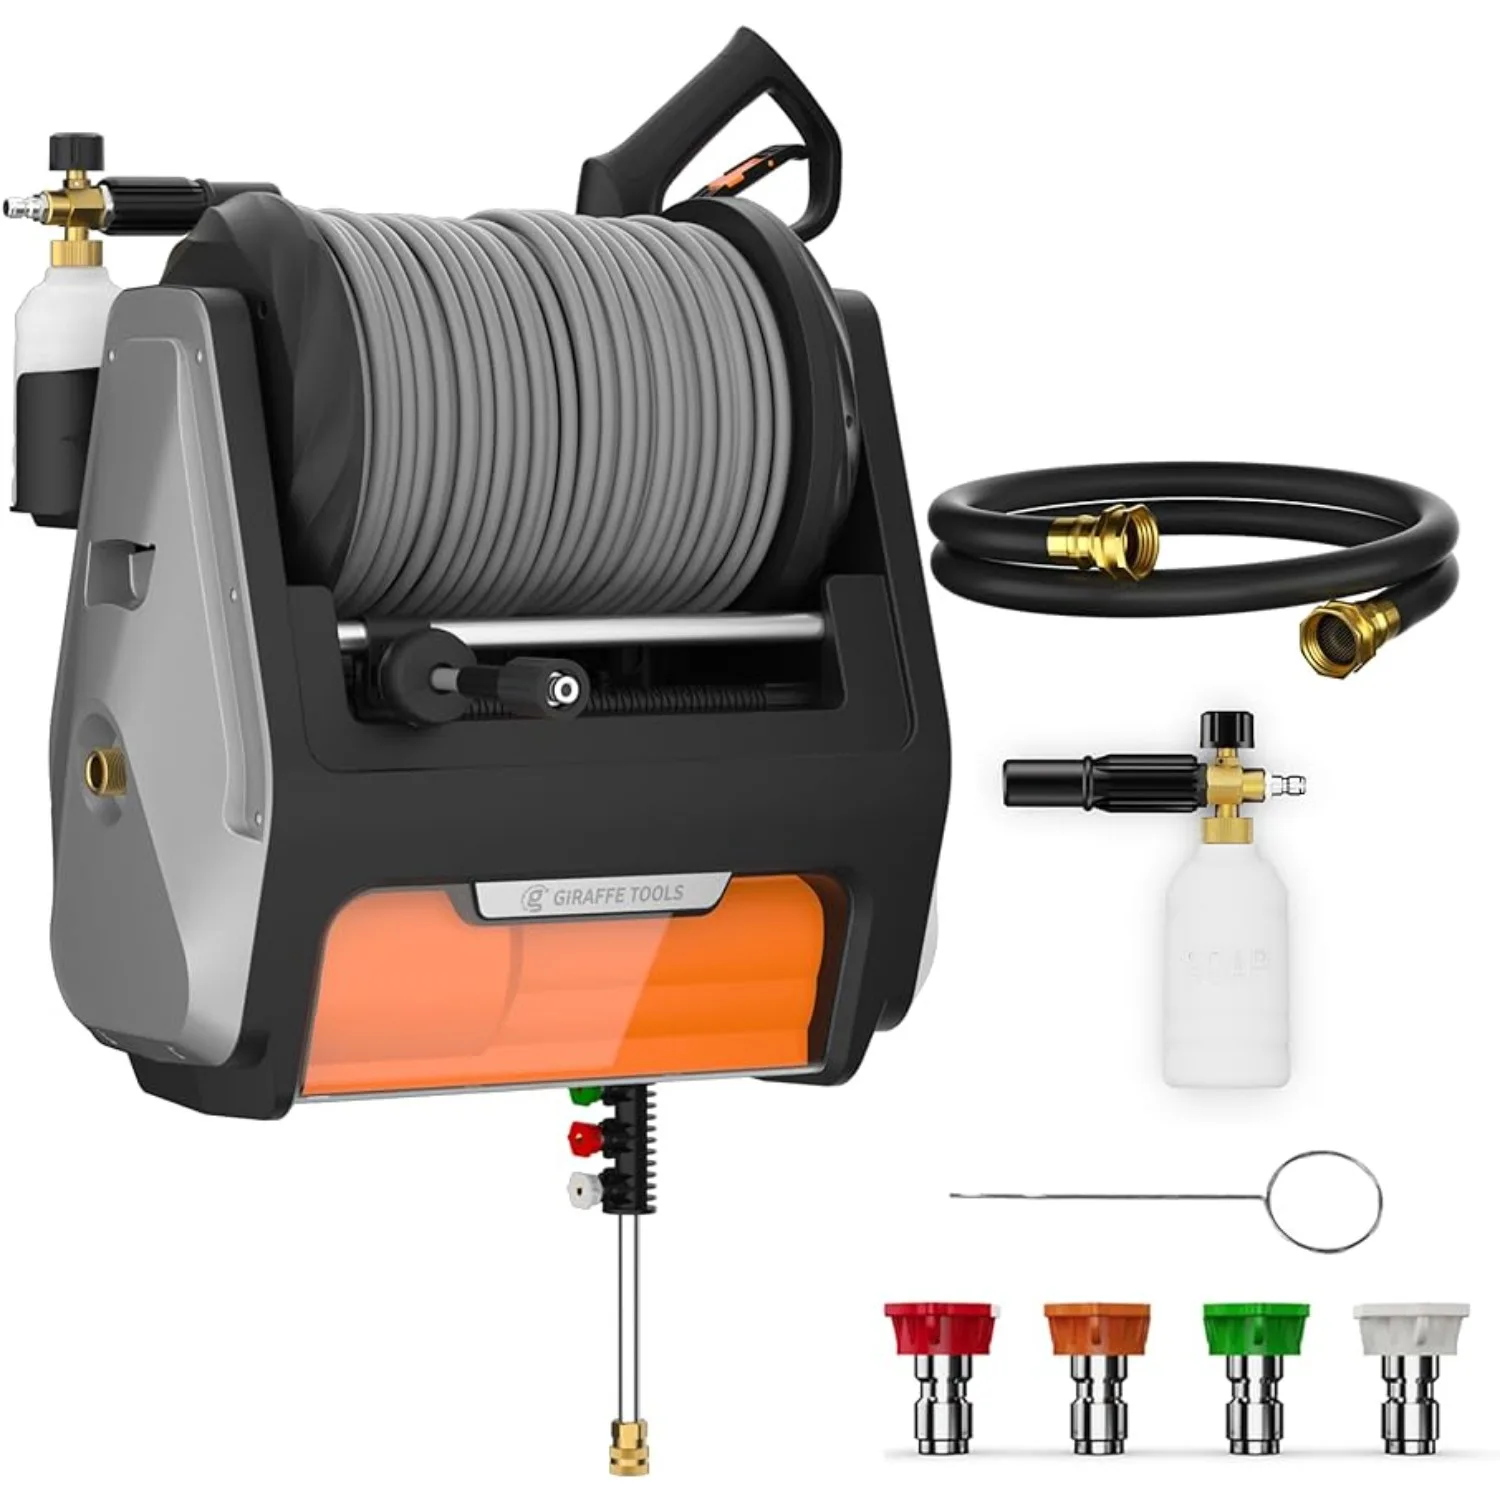 

Pressure Washer PRO, 2500PSI 1.6GPM, Electric Power Washer with 100FT Retractable Hoses for Cars, Fences, Patios, Dark Silver